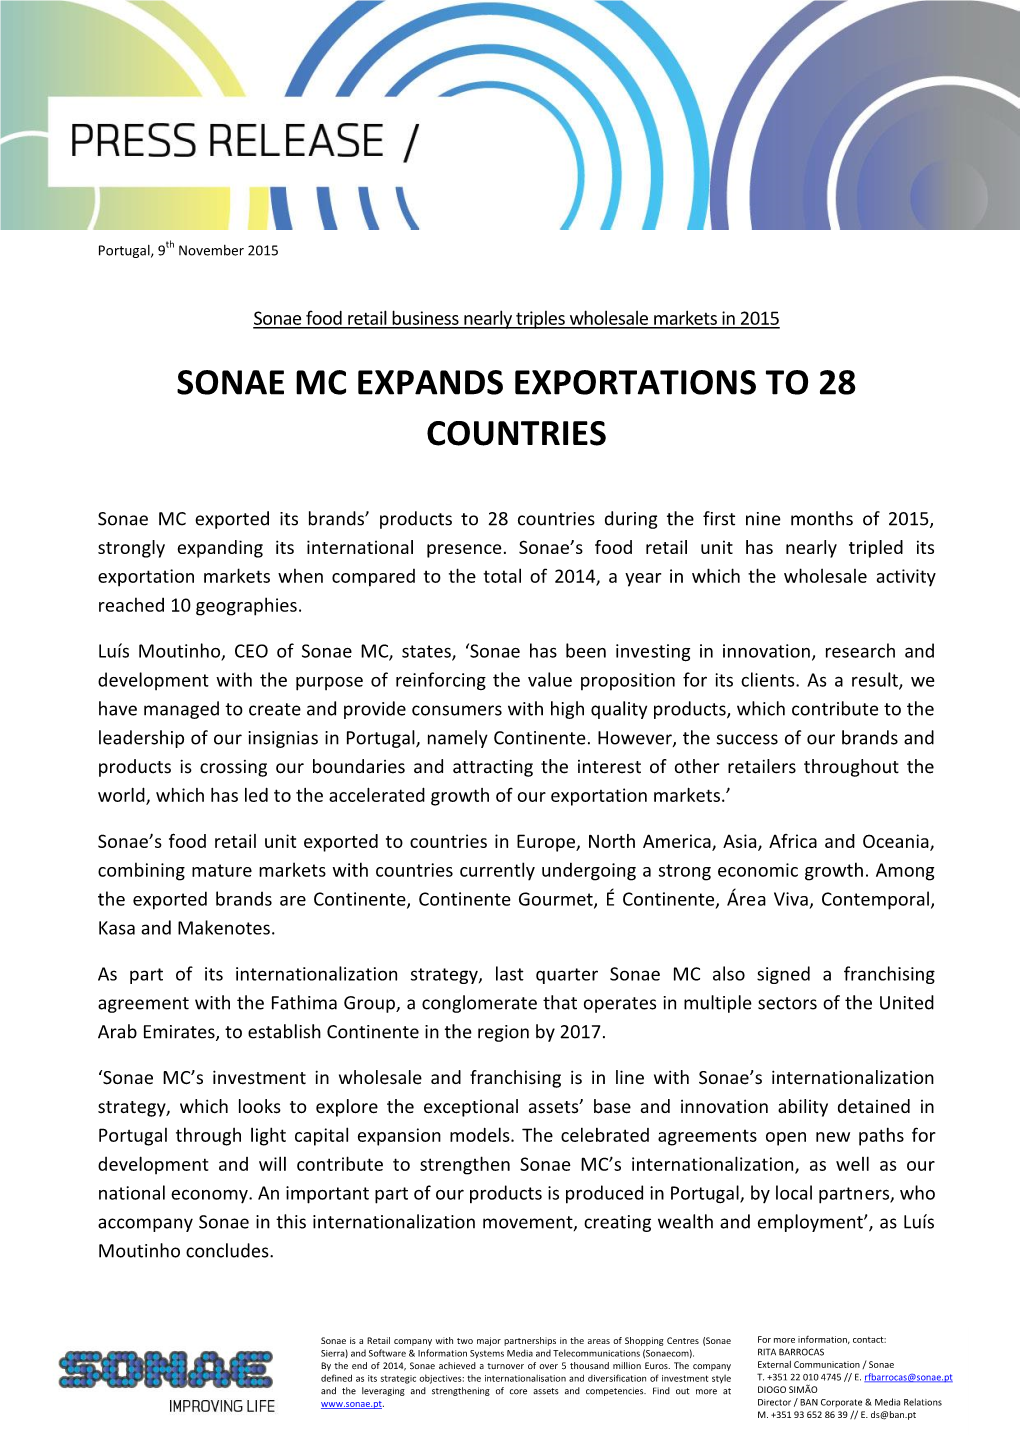 Sonae Mc Expands Exportations to 28 Countries